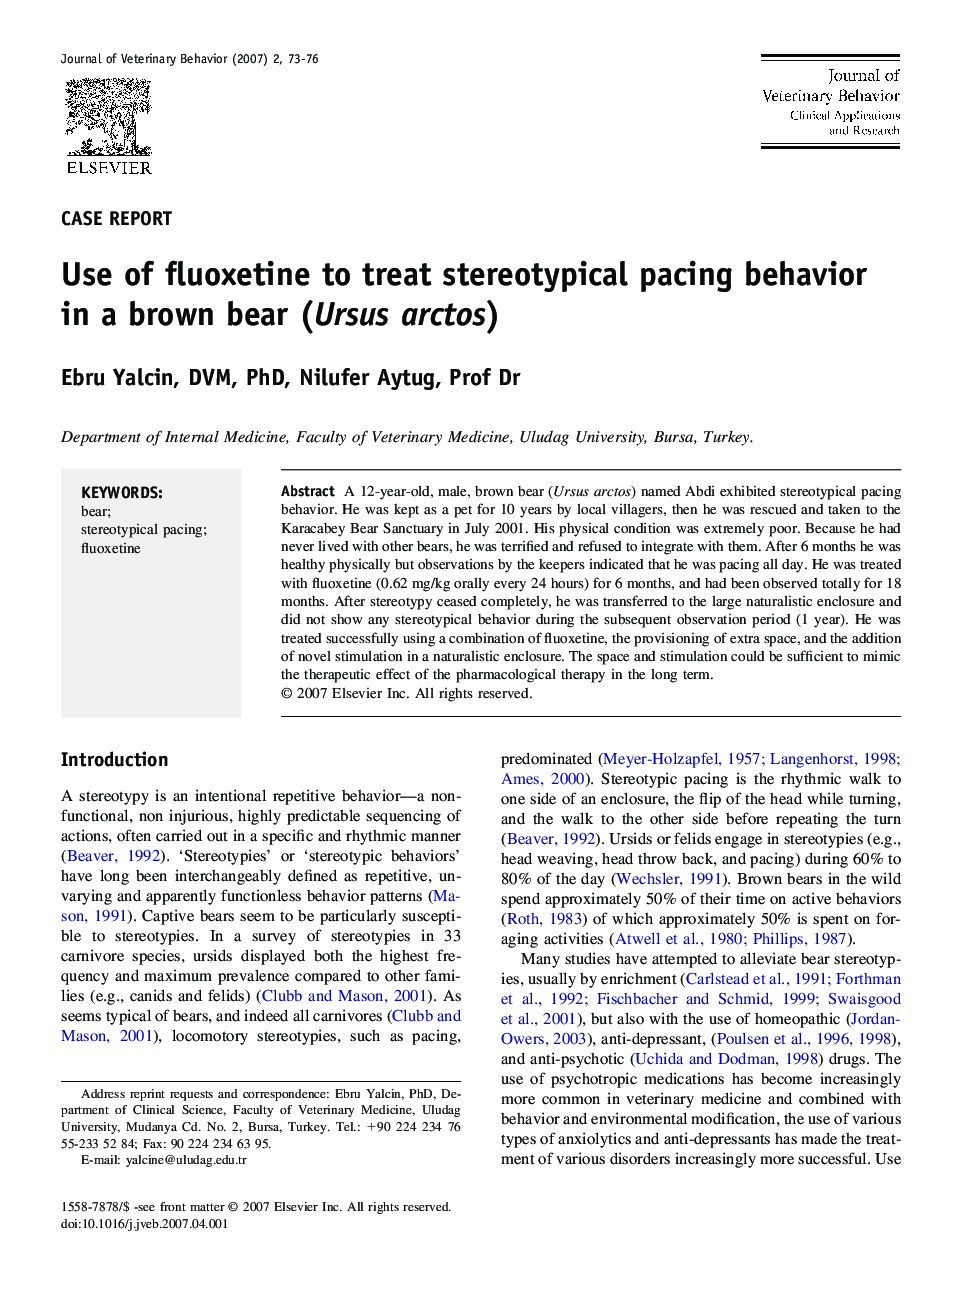 Use of fluoxetine to treat stereotypical pacing behavior in a brown bear (Ursus arctos)